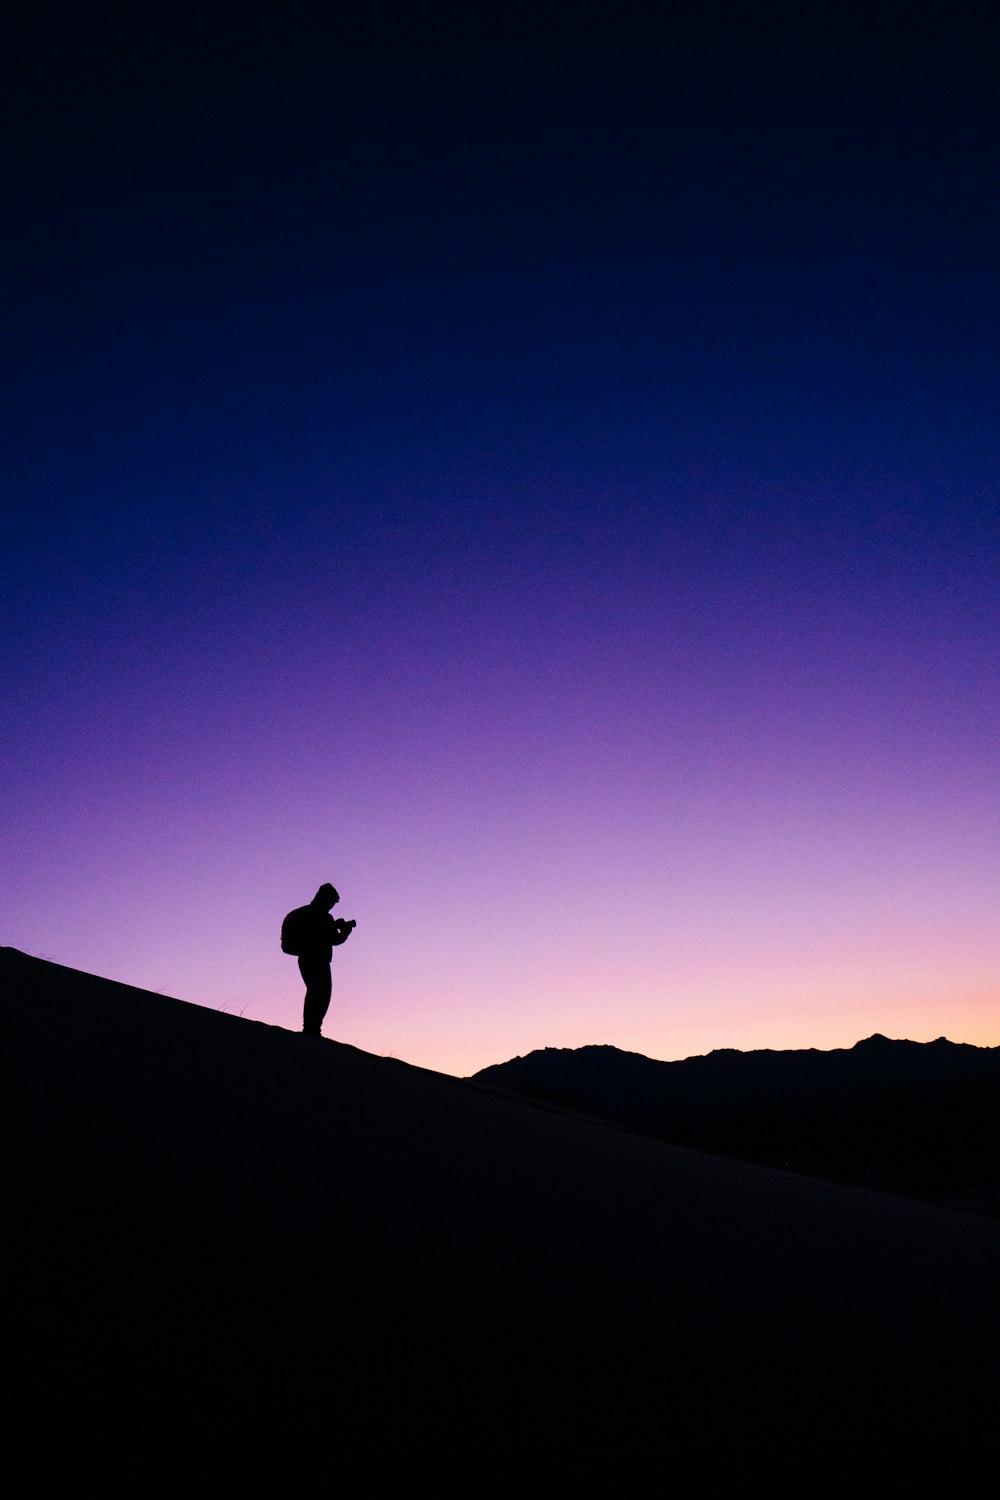 silhouette of person standing on rock formation during night time